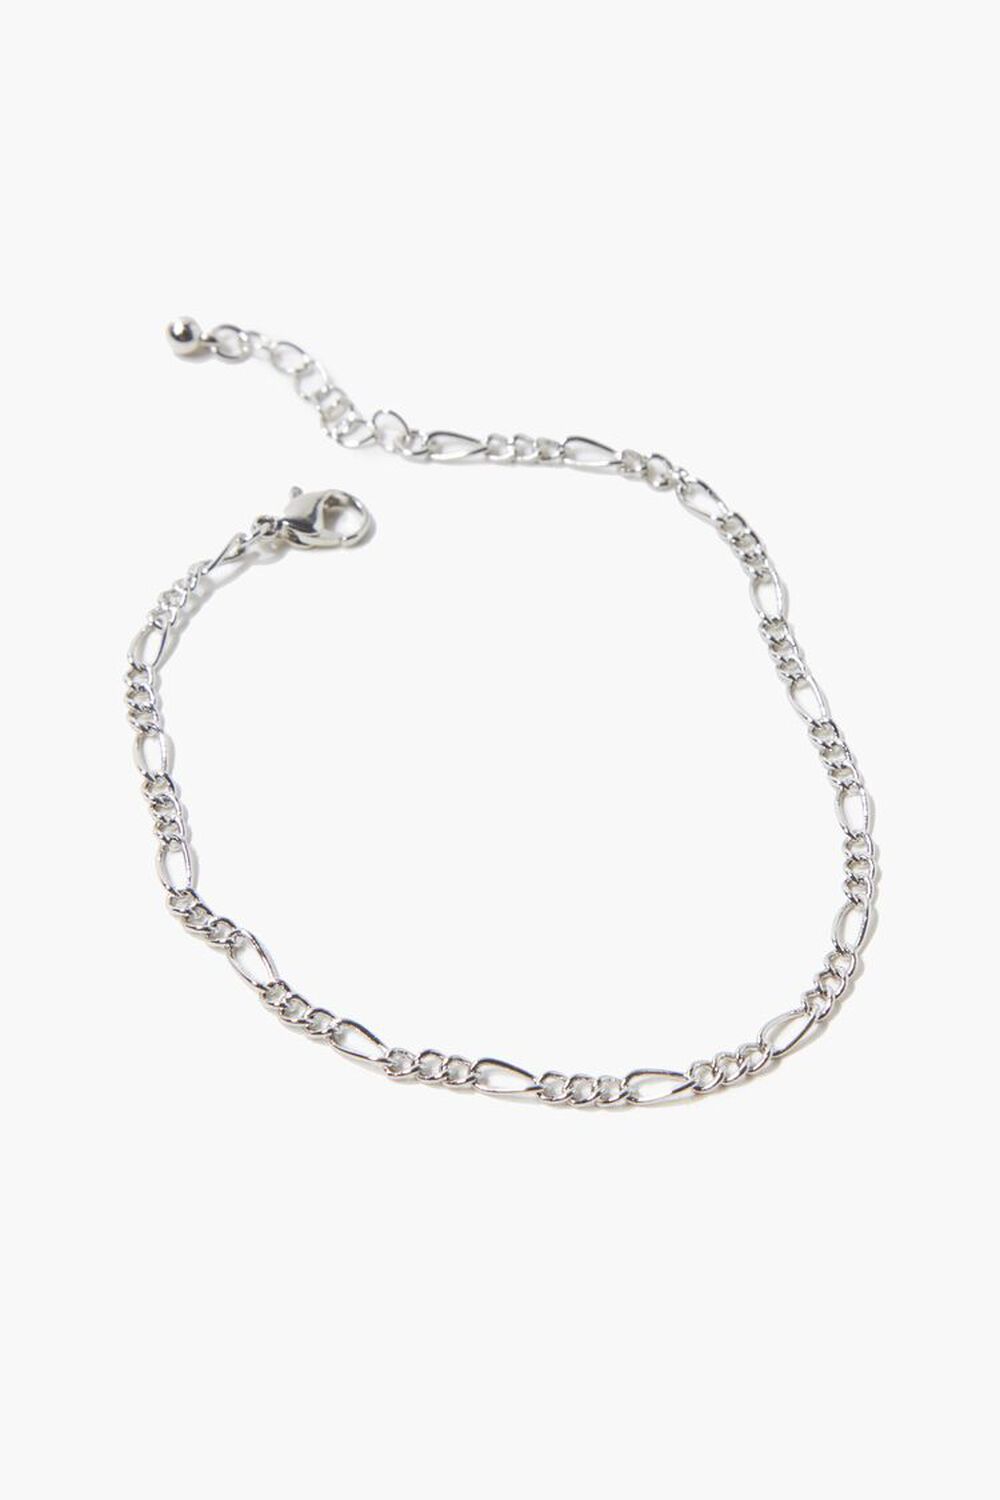 SILVER Curb Chain Anklet, image 1